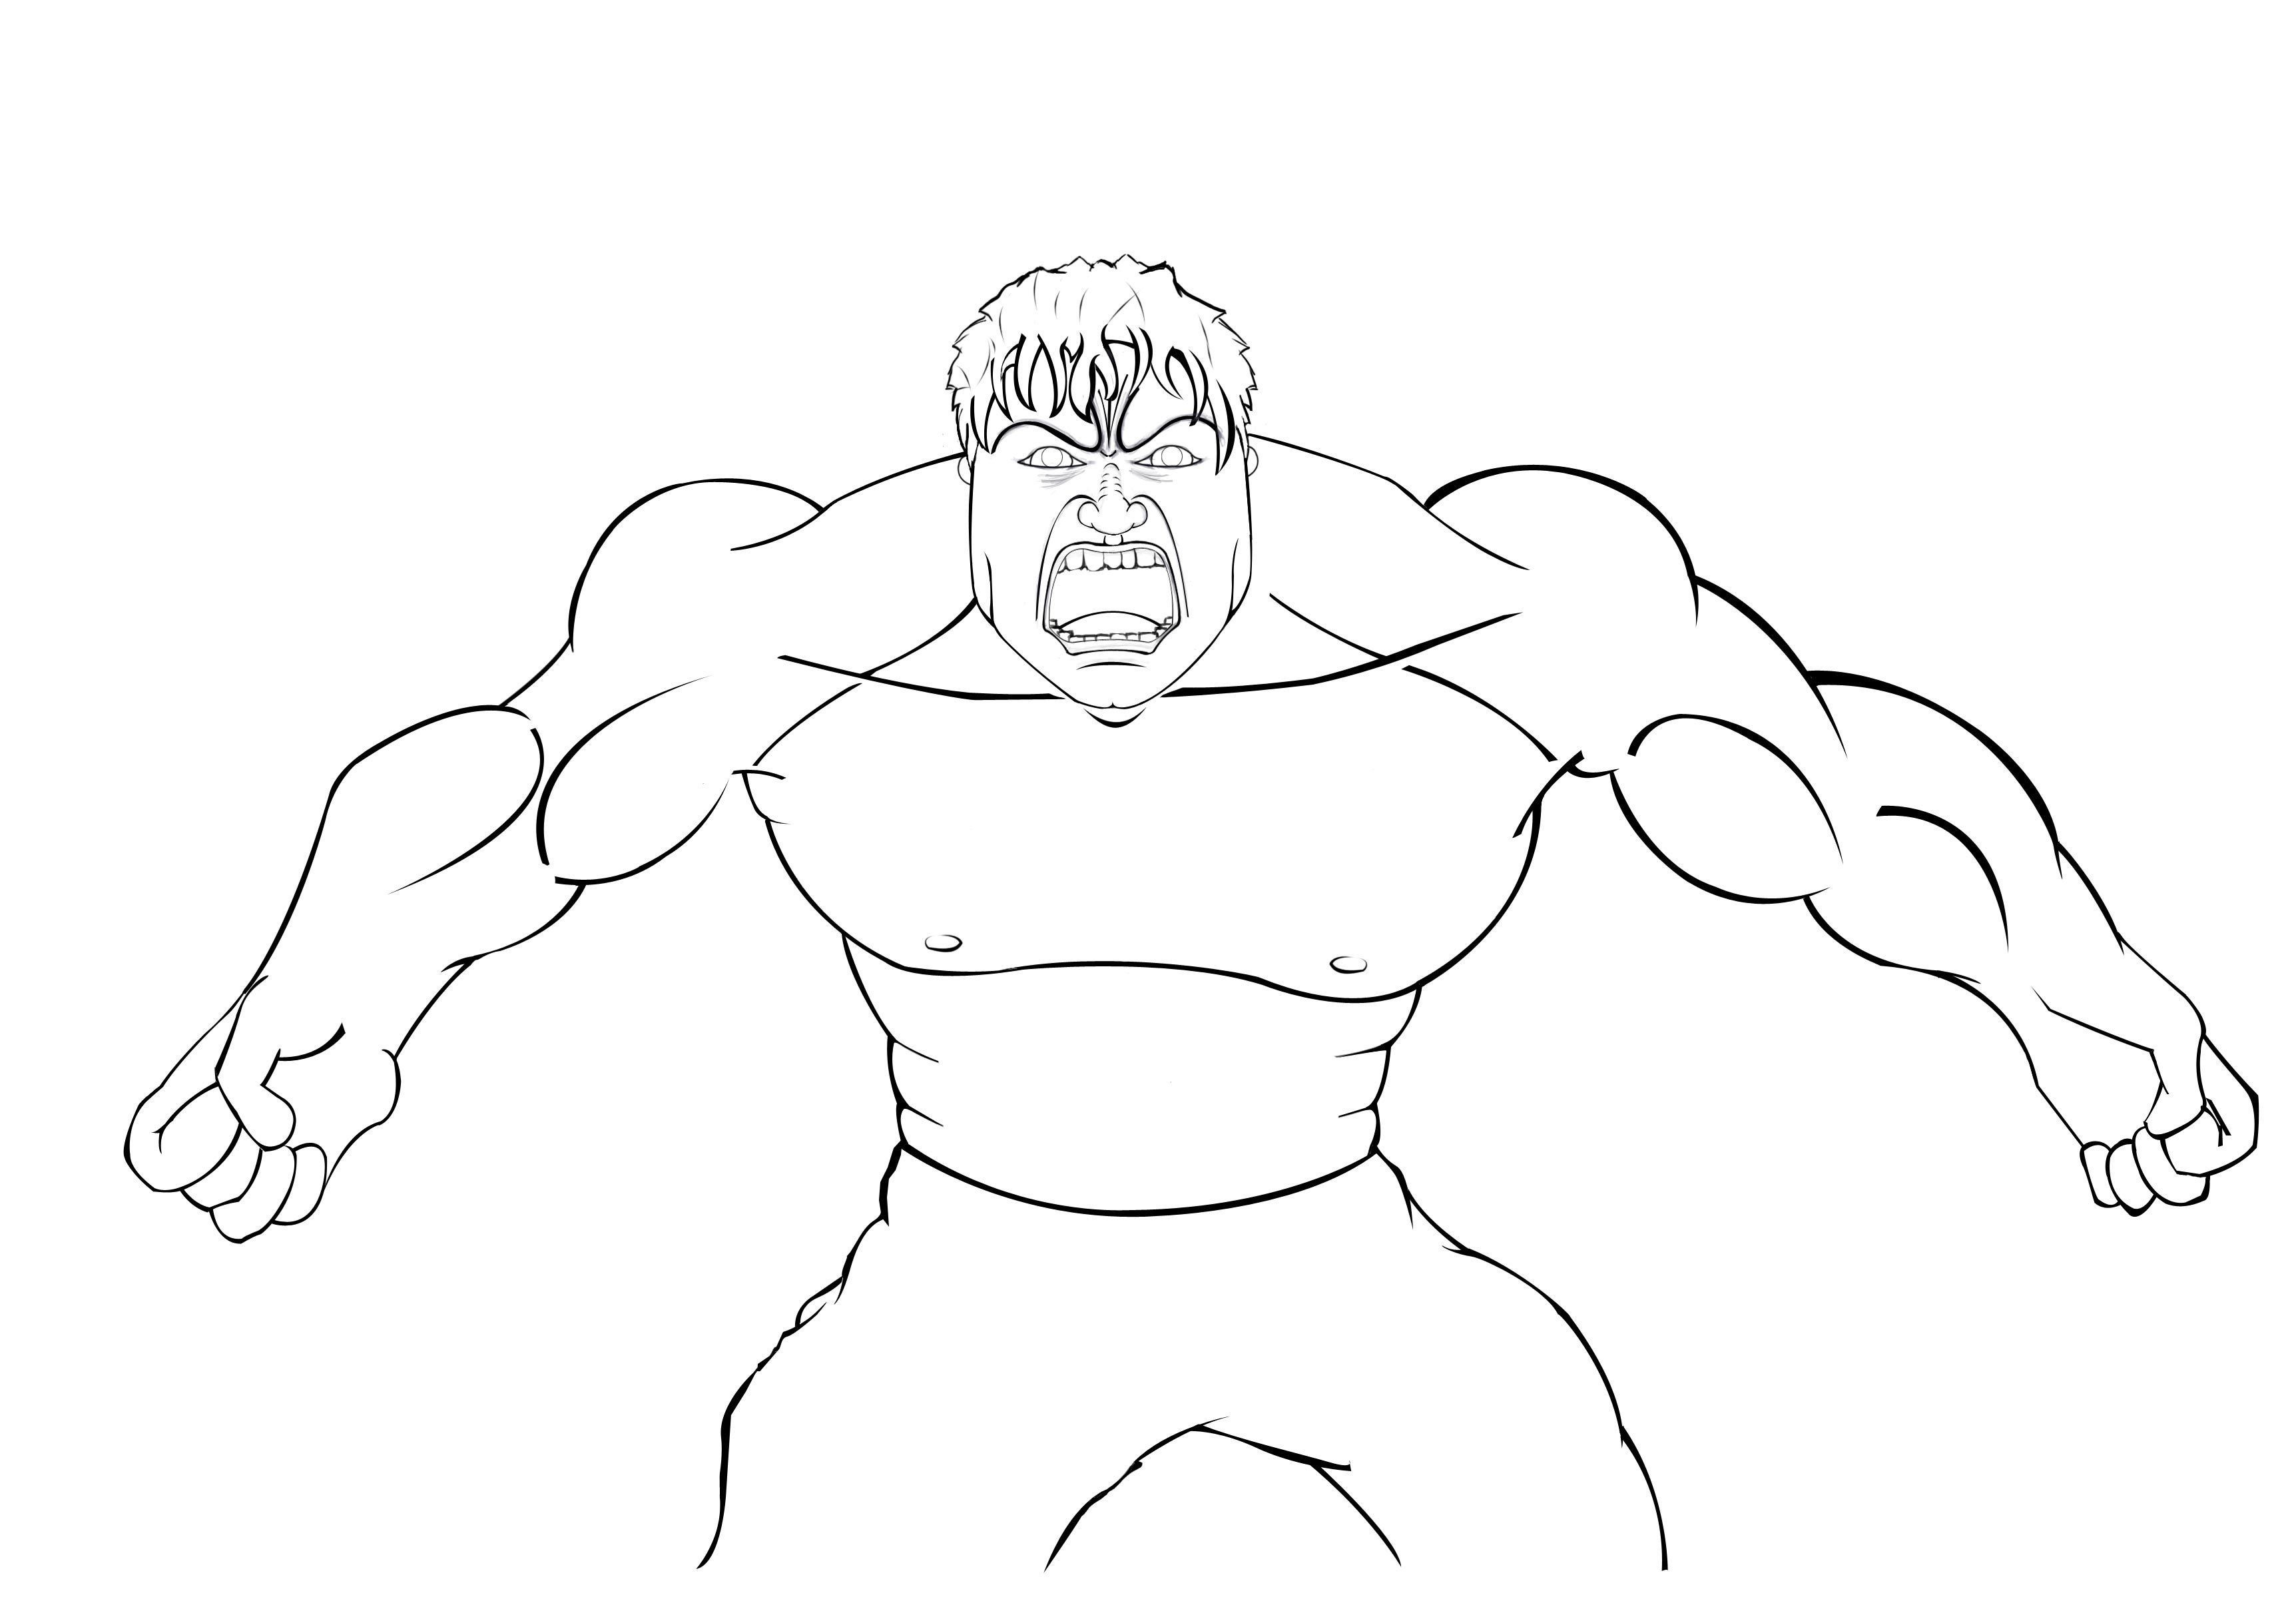 Flawless Hulk coloring page